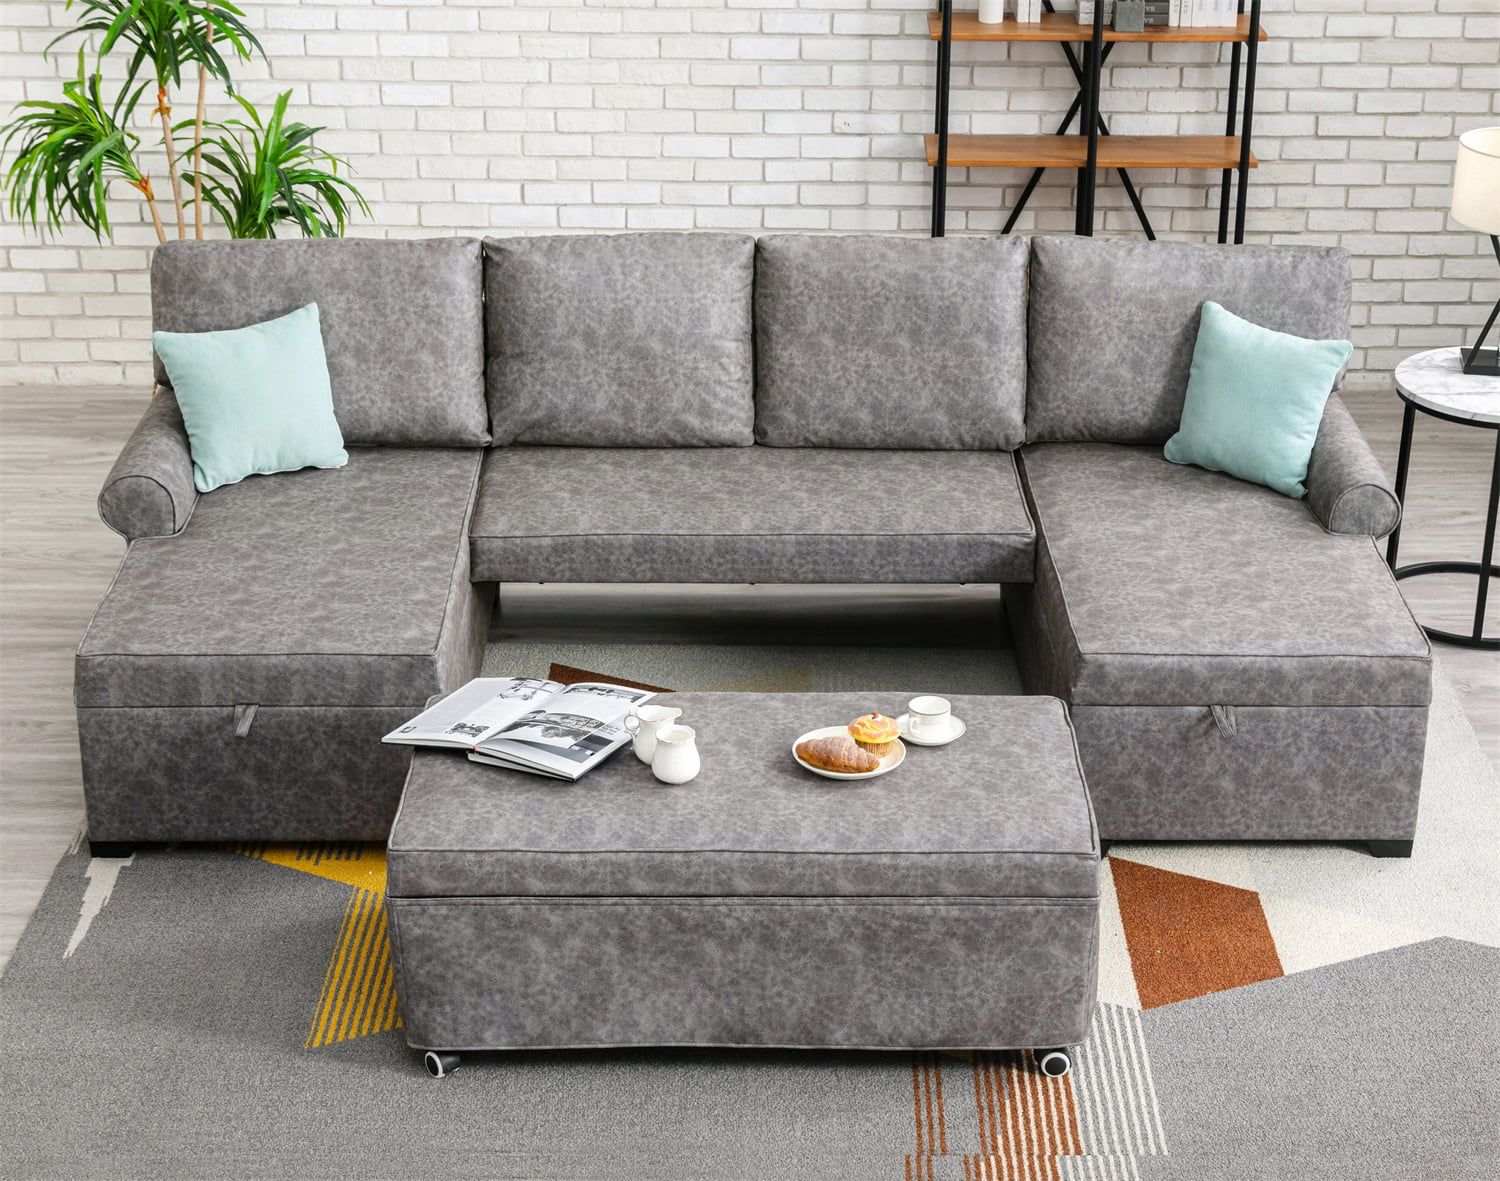 108.75" U Shaped Sofa With Pull Out Bed, Reversible Sectional Sofa With 2  Storage Chaise Lounges And 2 Usb Charging Ports, Convertible Sleeper Sofa  Bed 6 Seater Sofa Sets For Living Room, Gray – Walmart Within U Shaped Sectional Sofa With Pull Out Bed (Gallery 7 of 20)